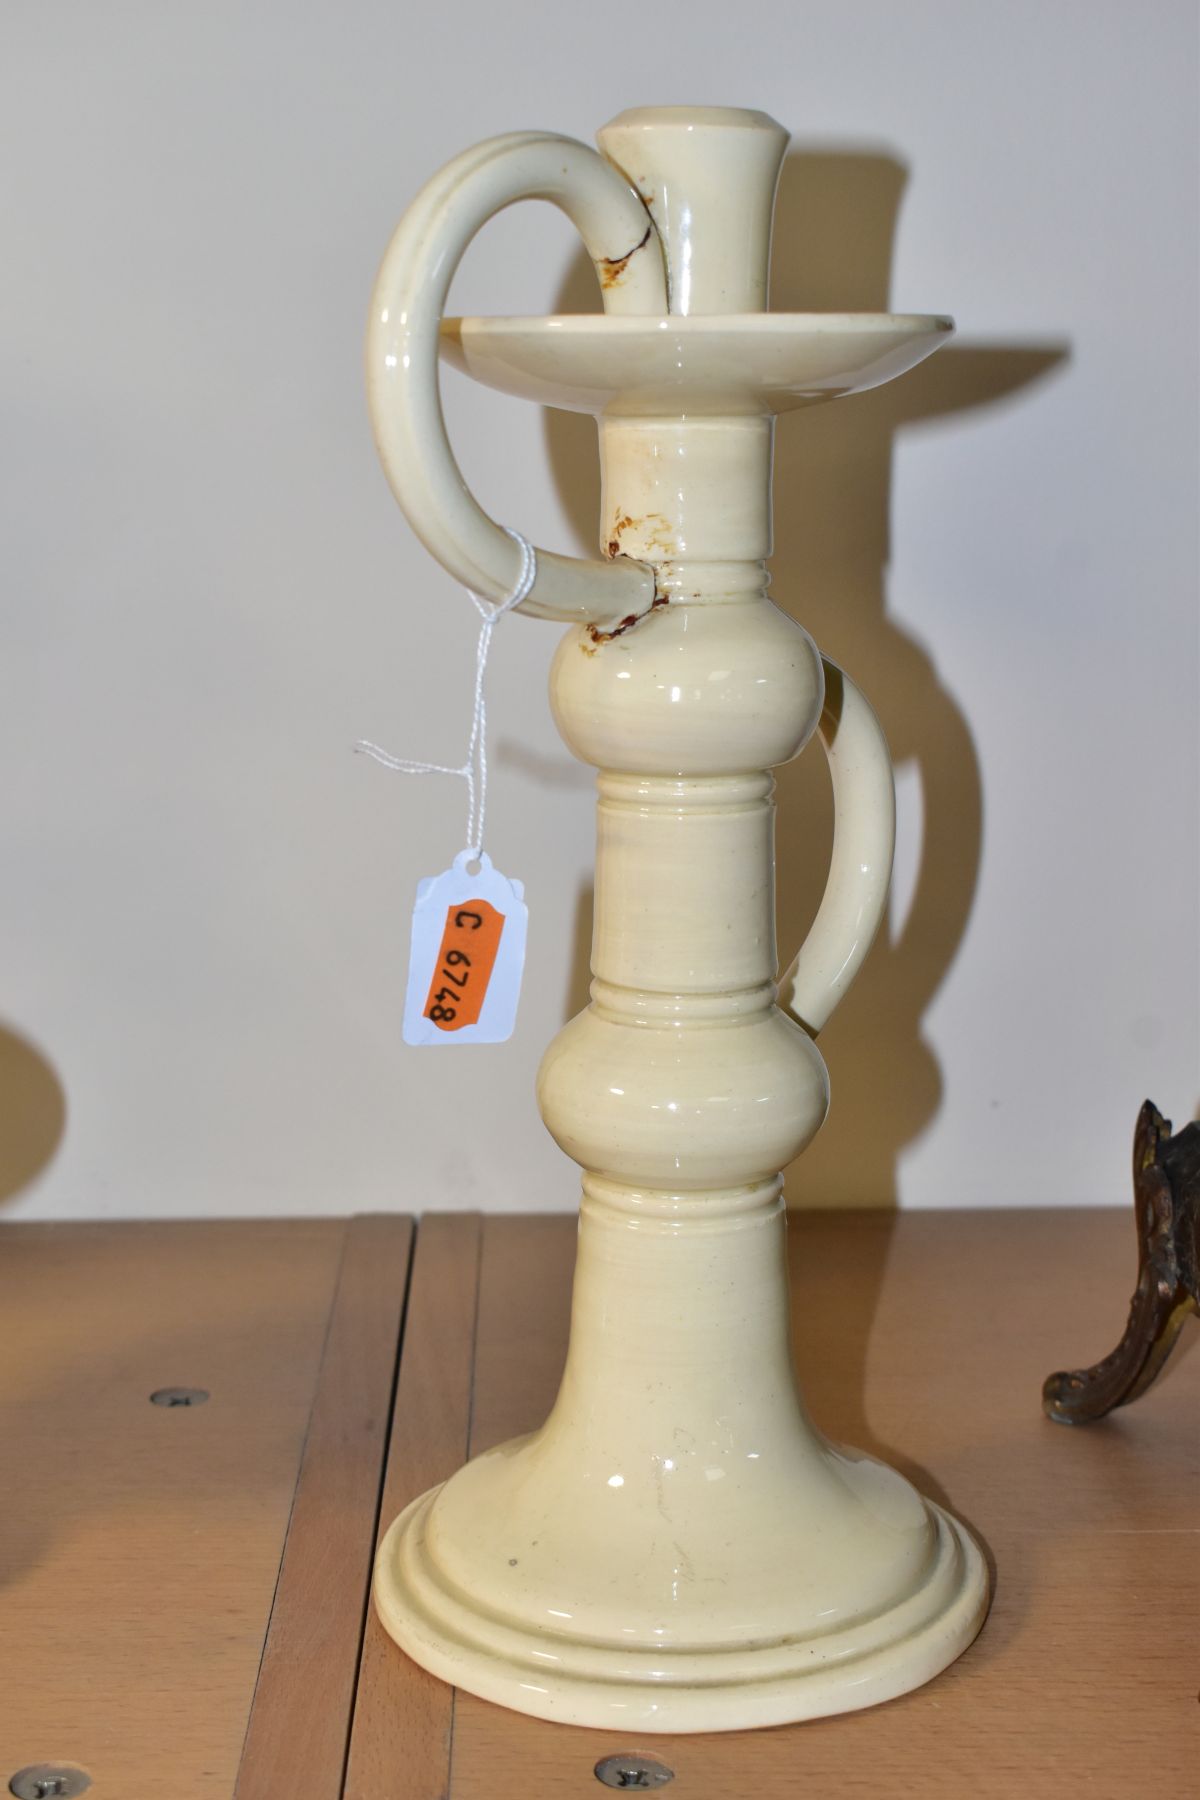 A WILEMAN & CO FOLEY FAIENCE ART POTTERY CANDLESTICK IN A CREAM 'SPANO-LUSTRA' GLAZE, with two - Image 2 of 3